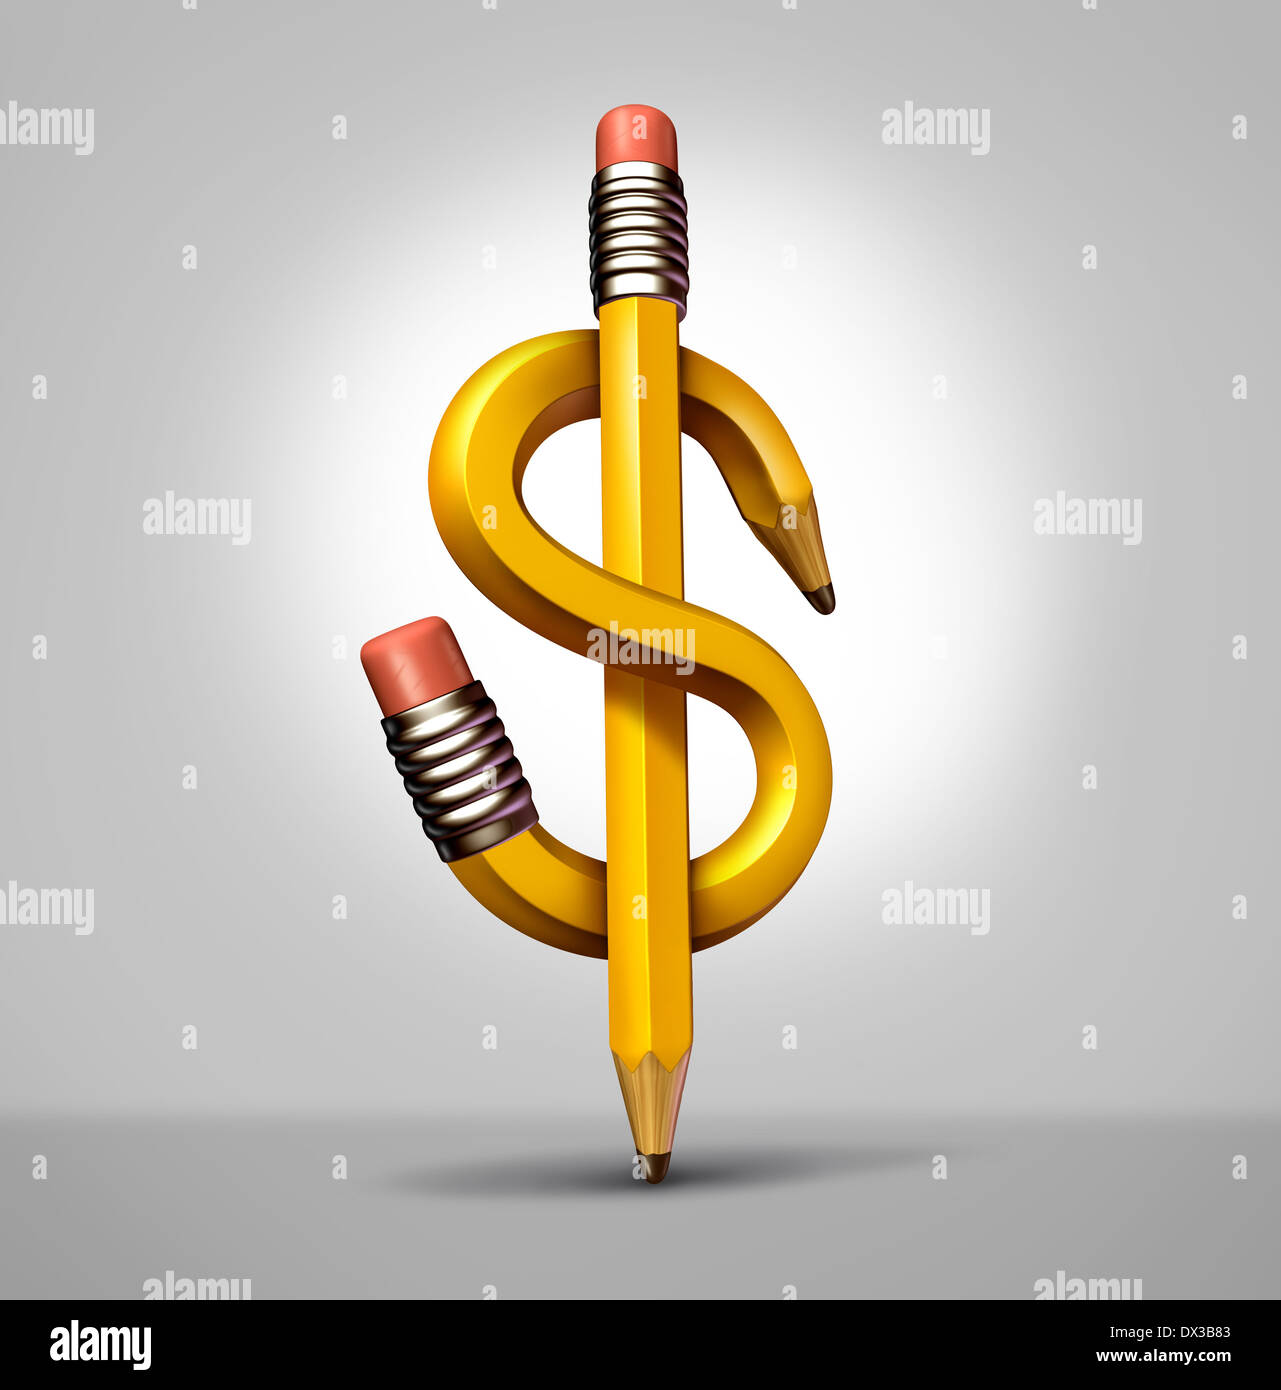 Financial planning business concept as a group of pencils shaped as a dollar sign as a metaphor for wealth strategy. Stock Photo